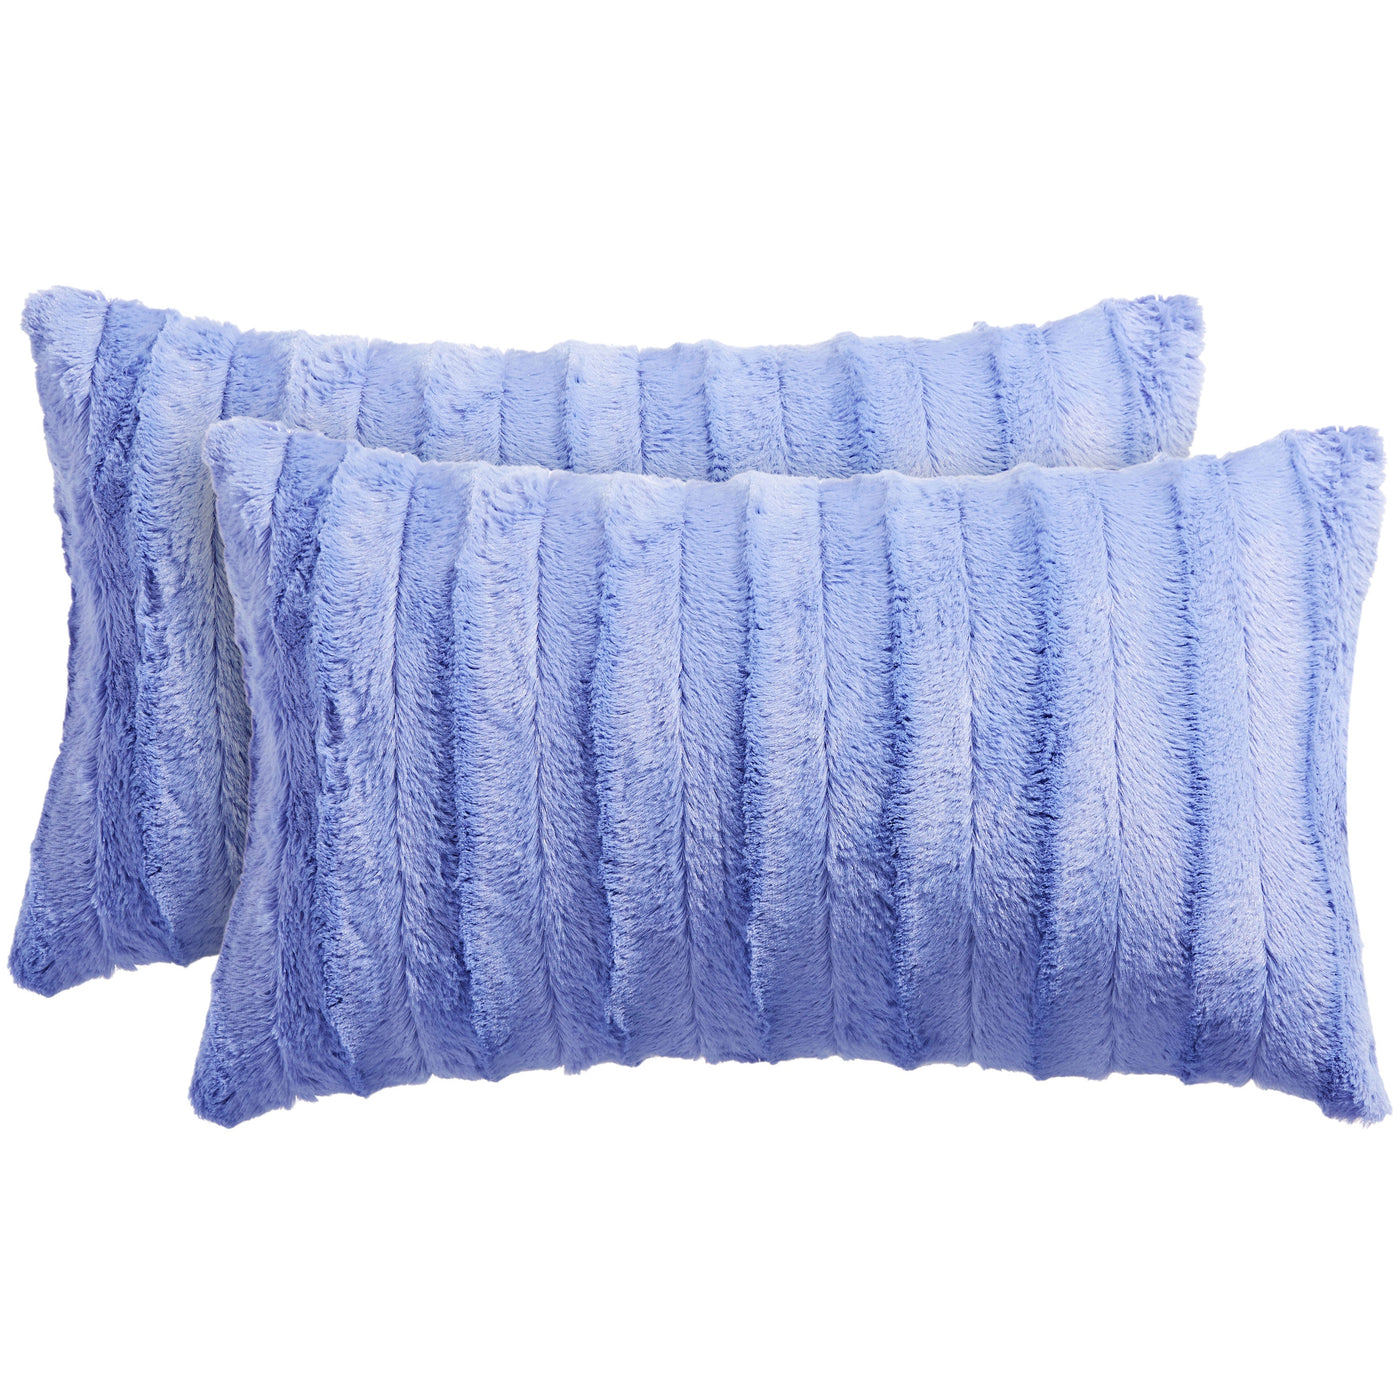 Cheer Collection Set of 2 Shaggy Long Hair Throw Pillows - Purple - 18 x 18 in